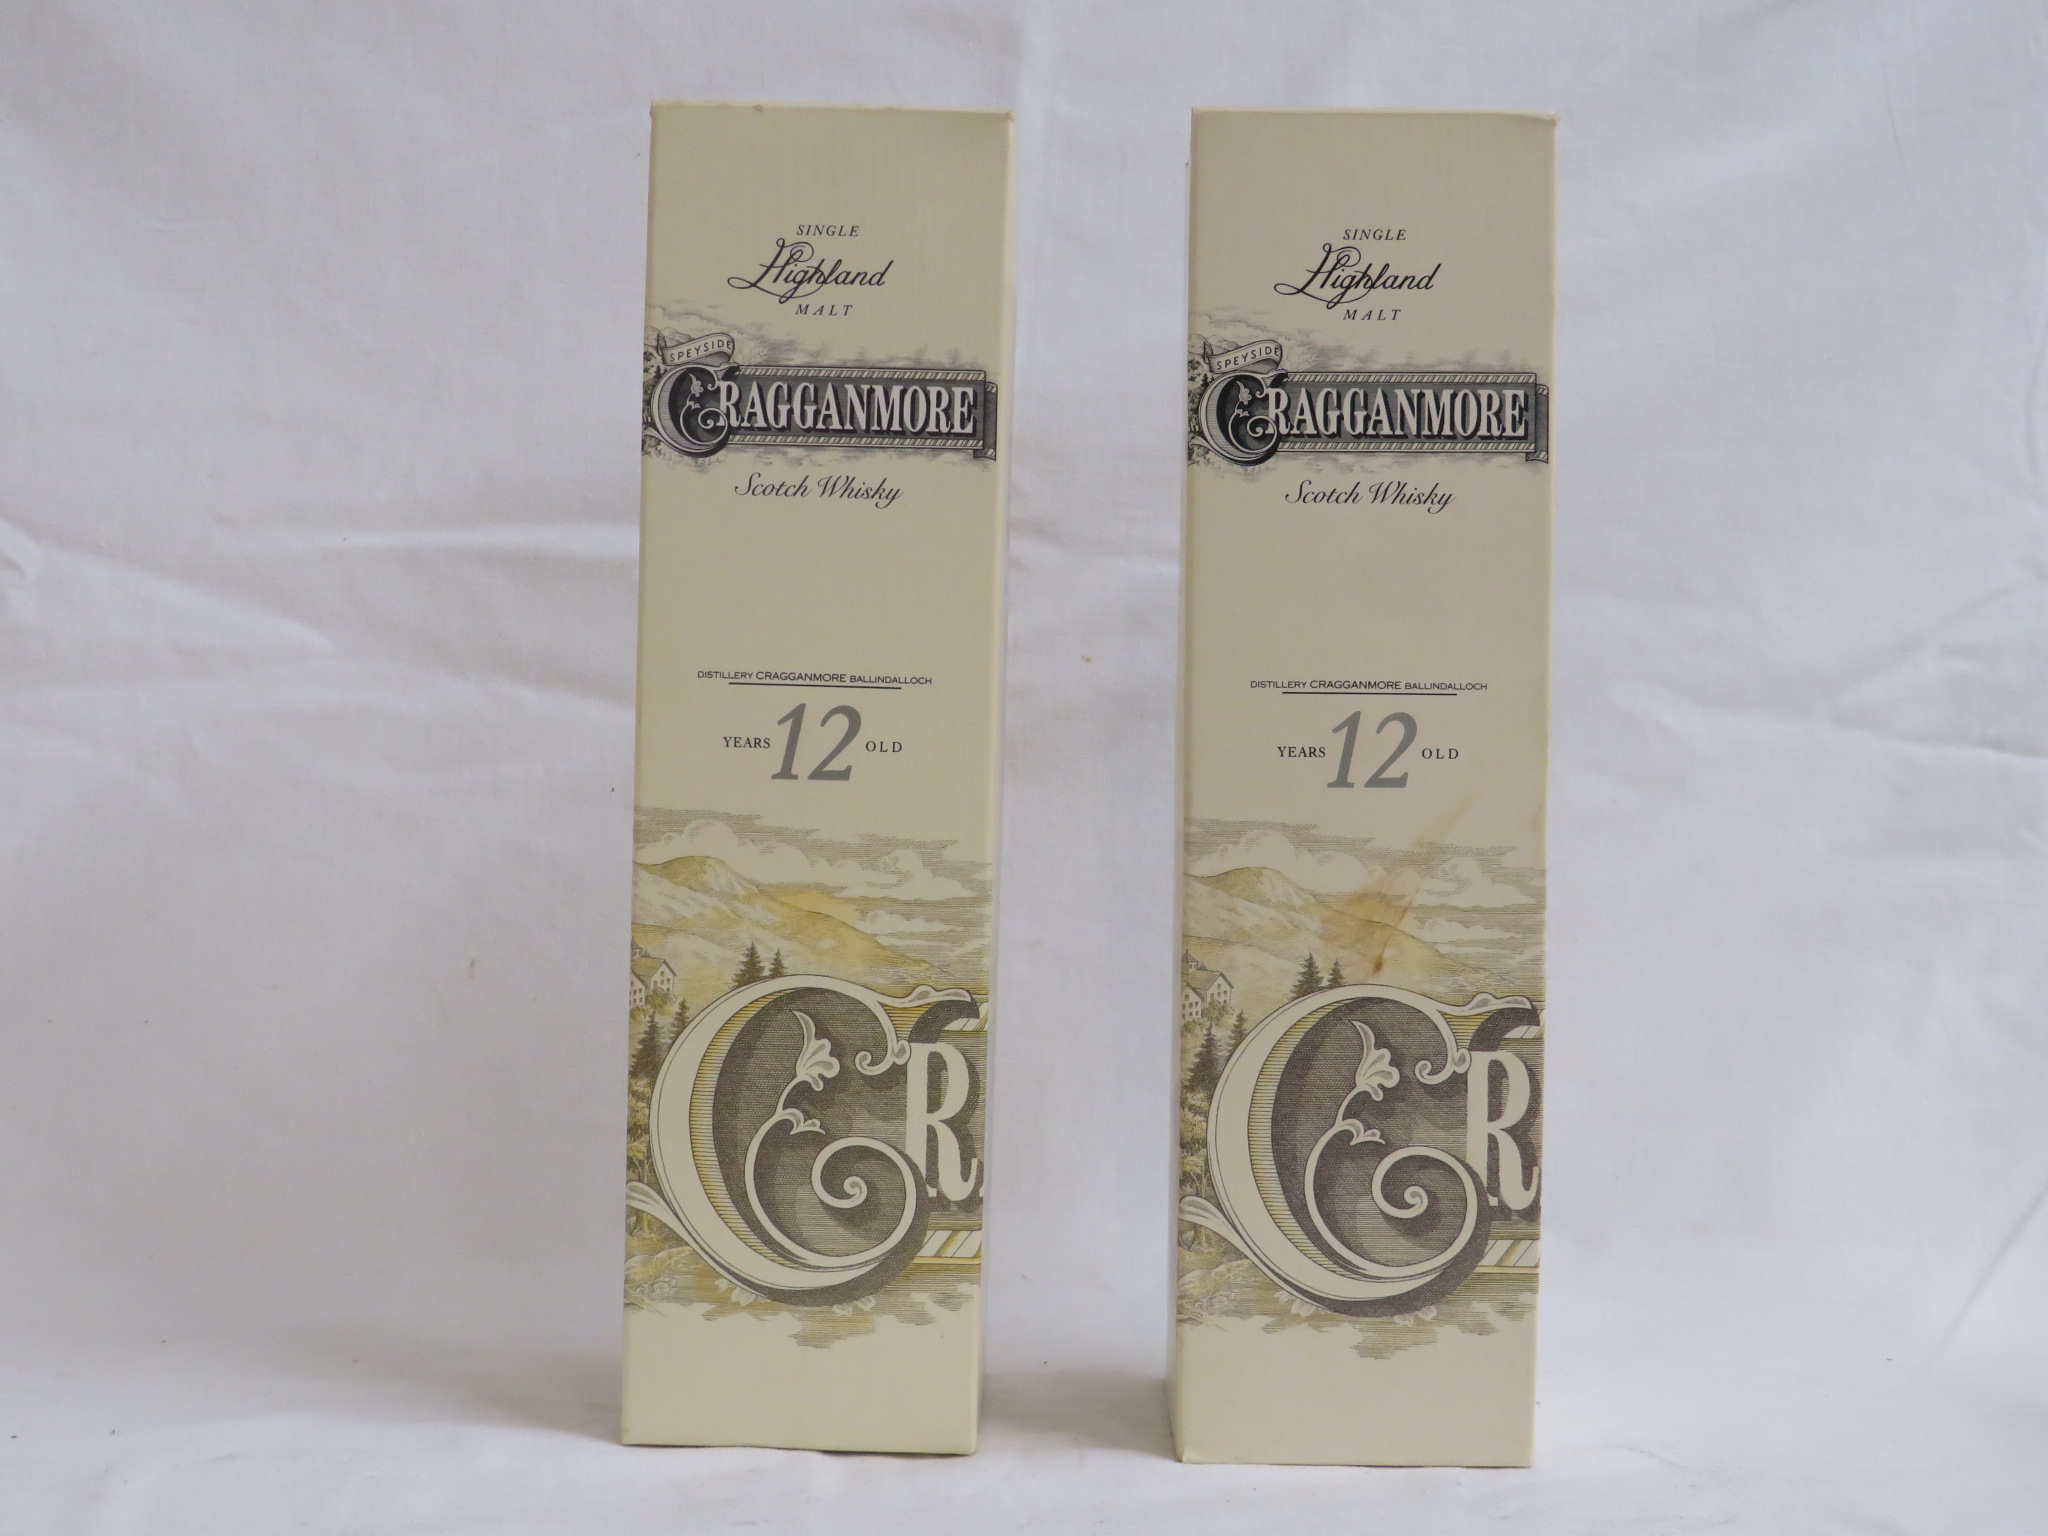 Two boxed bottles of Cragganmore single Highland malt Scotch whisky, 12 years old, 75cl - Image 4 of 4